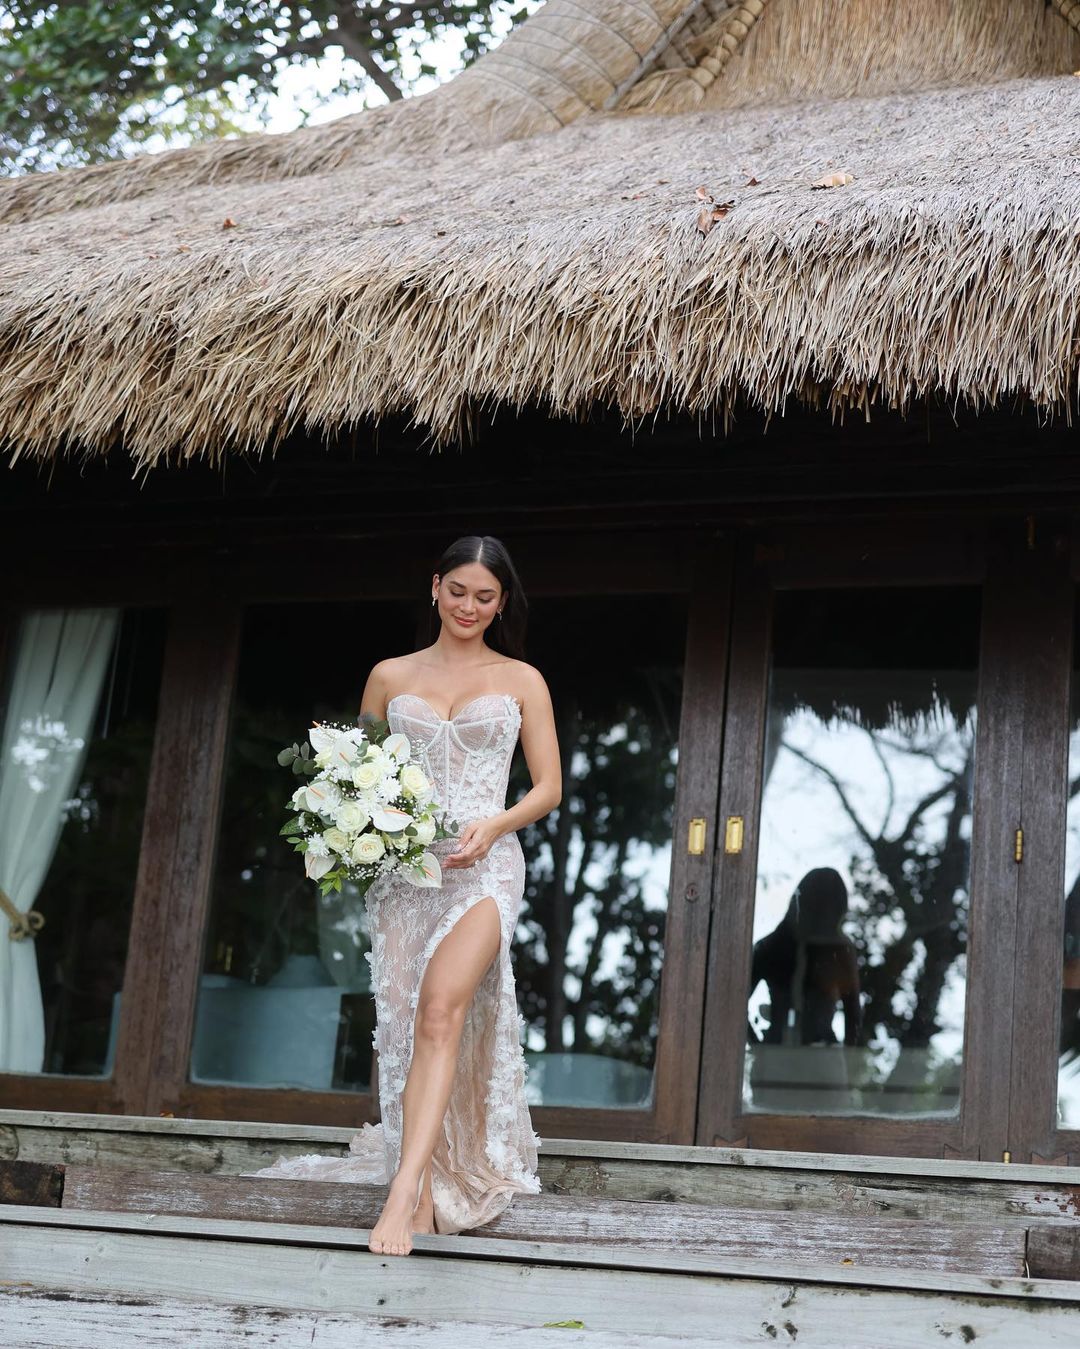 Pia Wurtzbach in her wedding gown exiting the villa at North Island, Seychelles